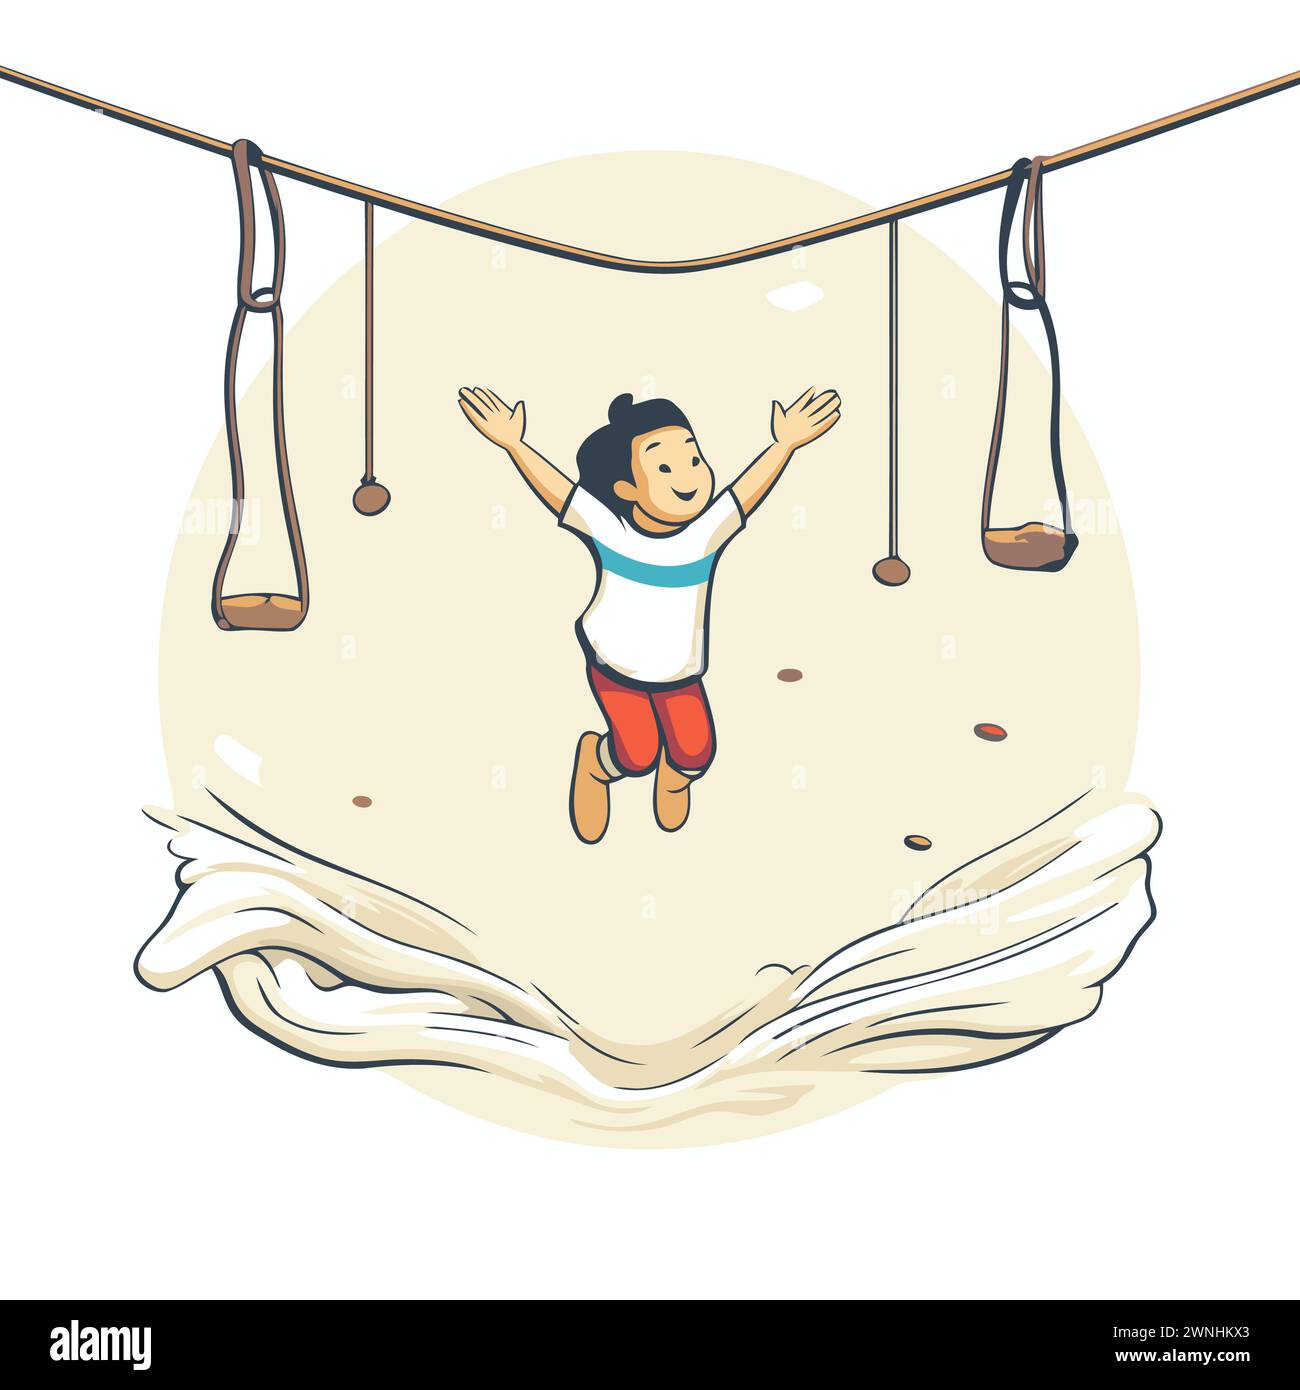 Boy swinging on rope Stock Vector Images - Alamy